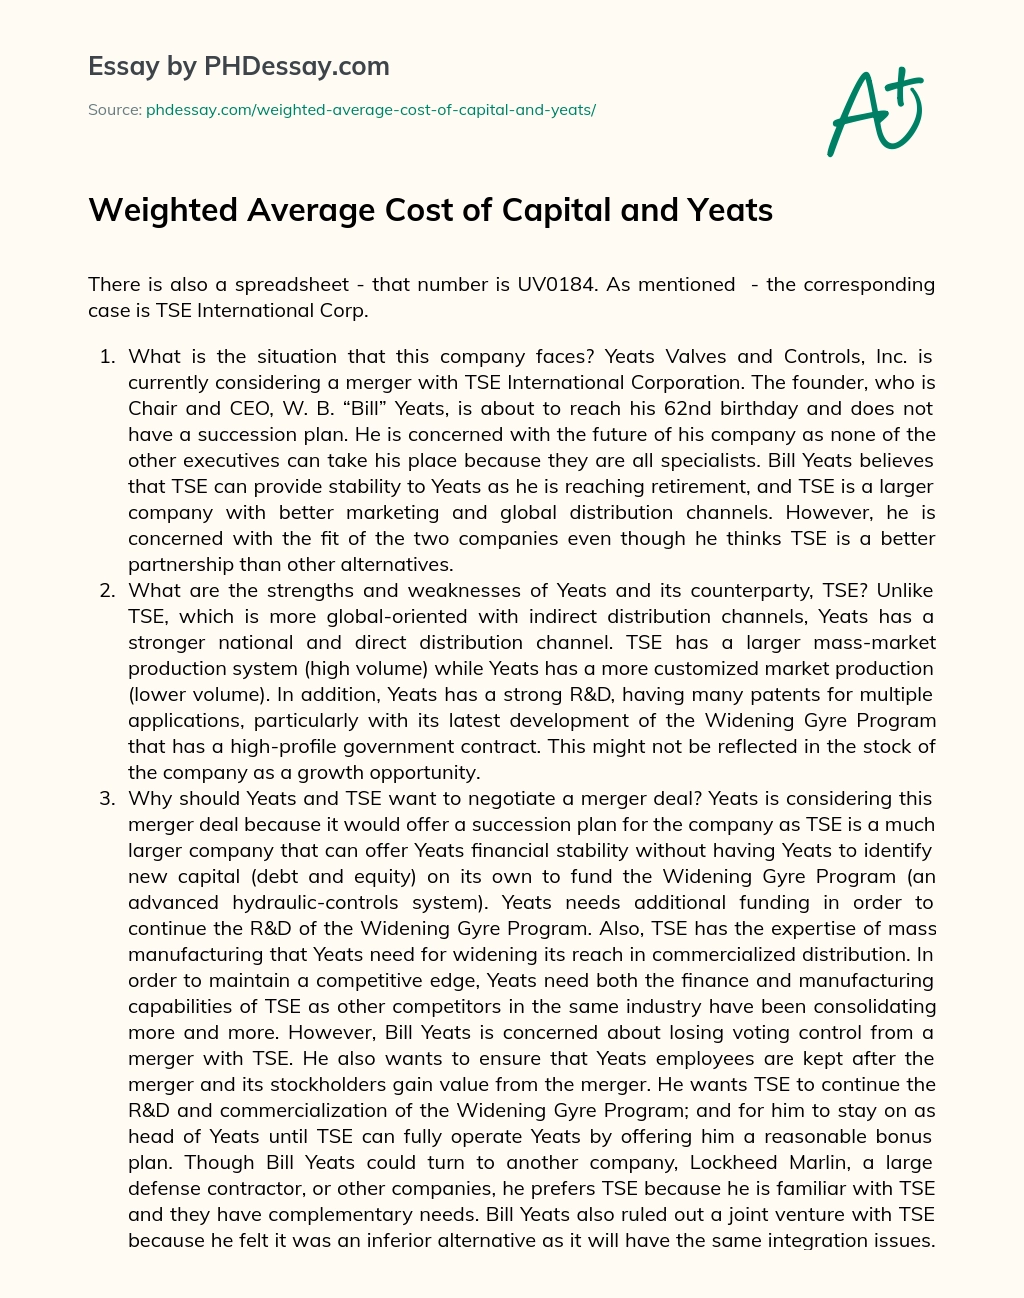 Weighted Average Cost of Capital and Yeats essay